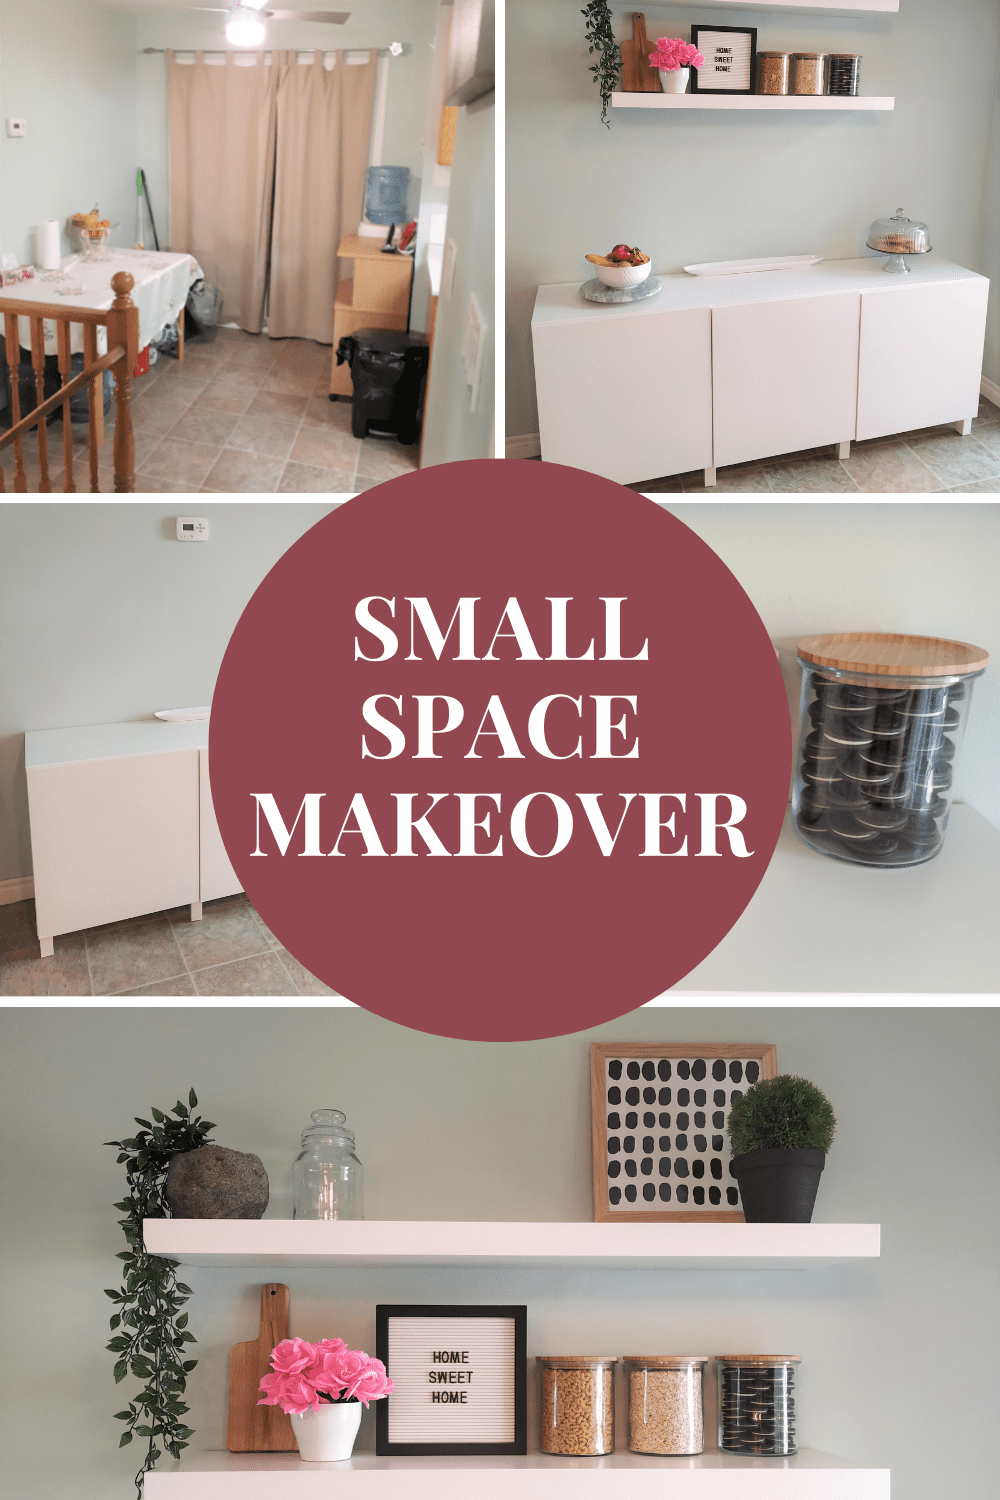 Collage of small space makeover with text overlay.